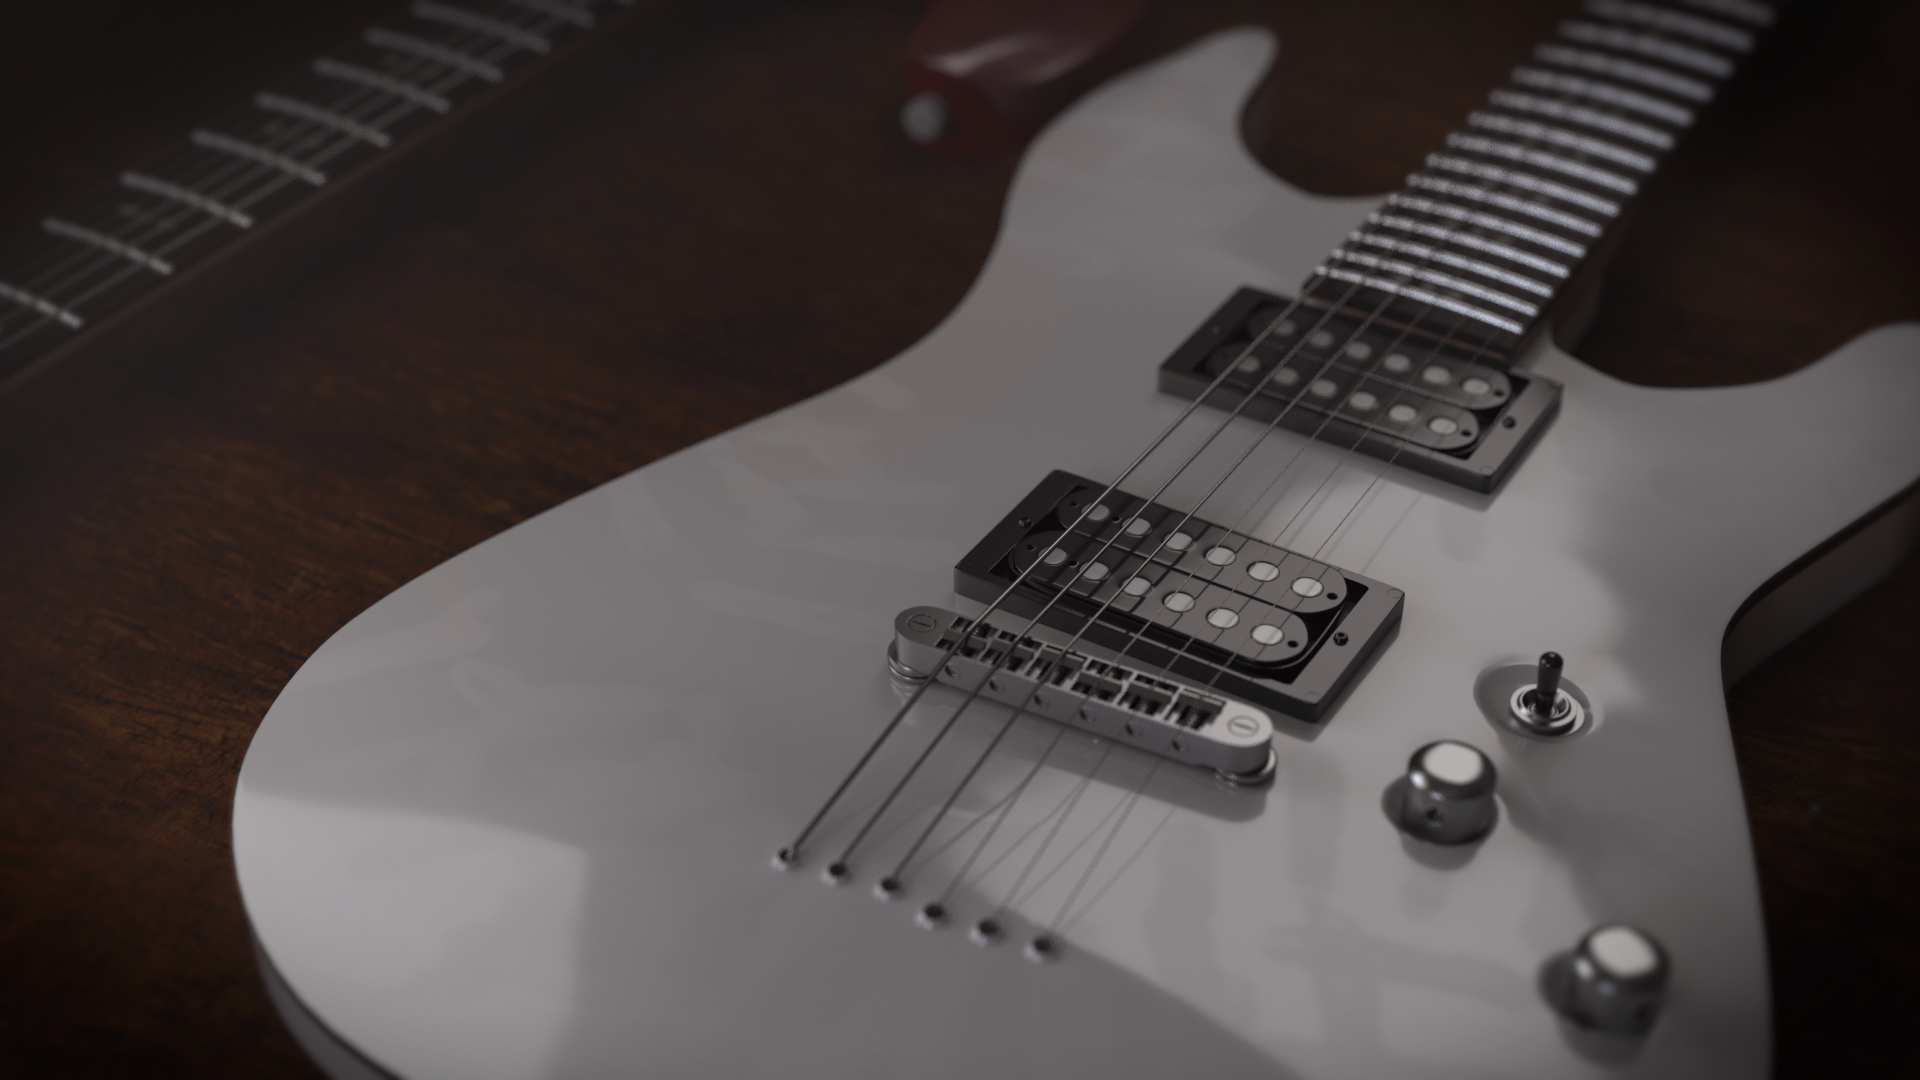 A 3D model of the Schecter Omen-6 guitar on a table with moody lighting by Harry Hughes.